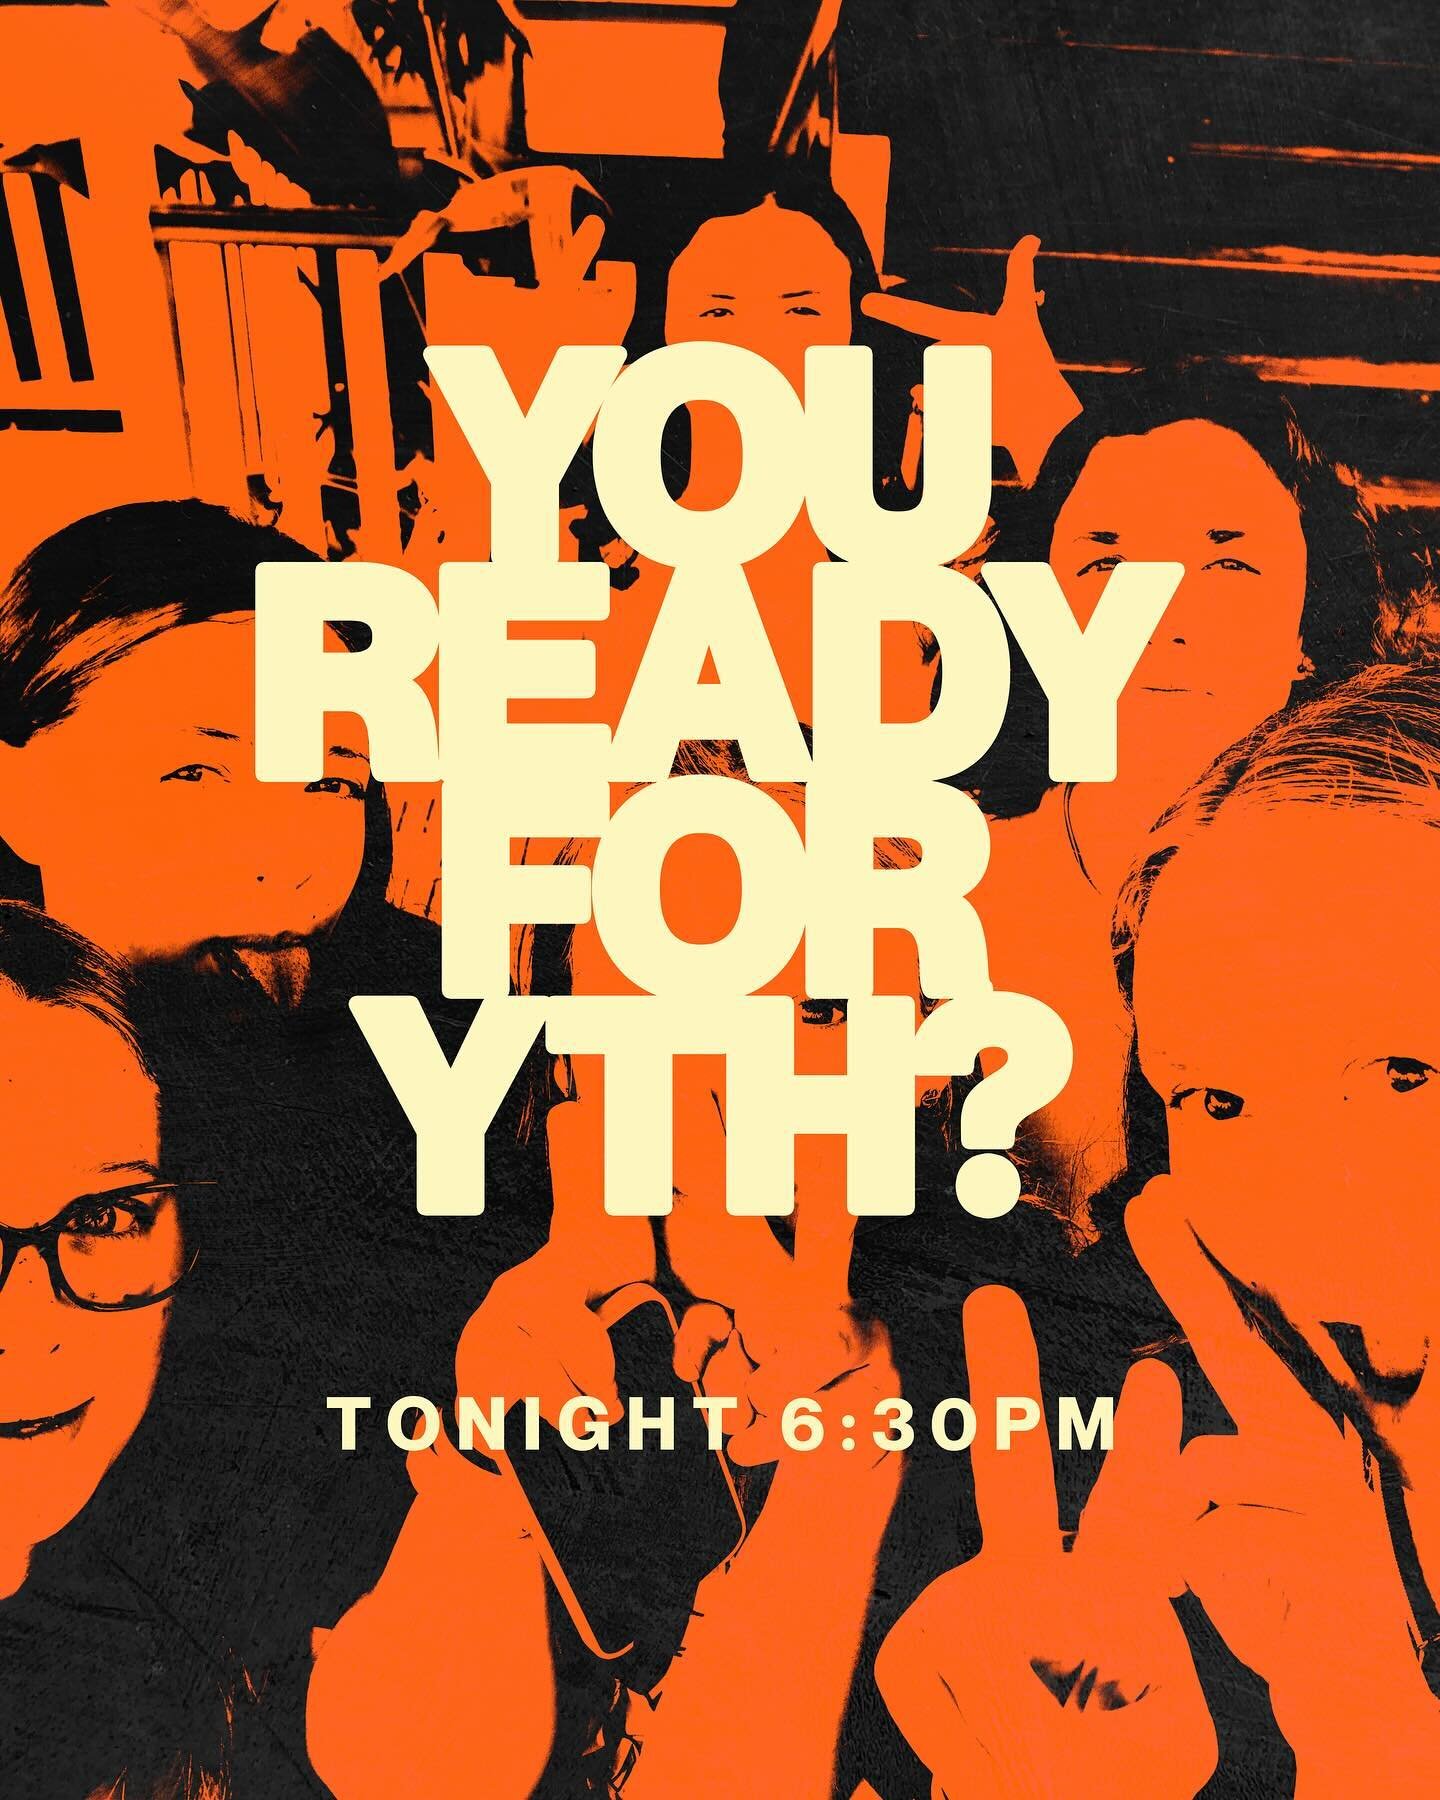 HAPPY FRIDAY! YTH is back tonight at church from 6:30PM, make sure you&rsquo;re there. 🤝

We got games, food, hangs, the word, and more happening. Bring your friends, and we&rsquo;ll see you there 💥